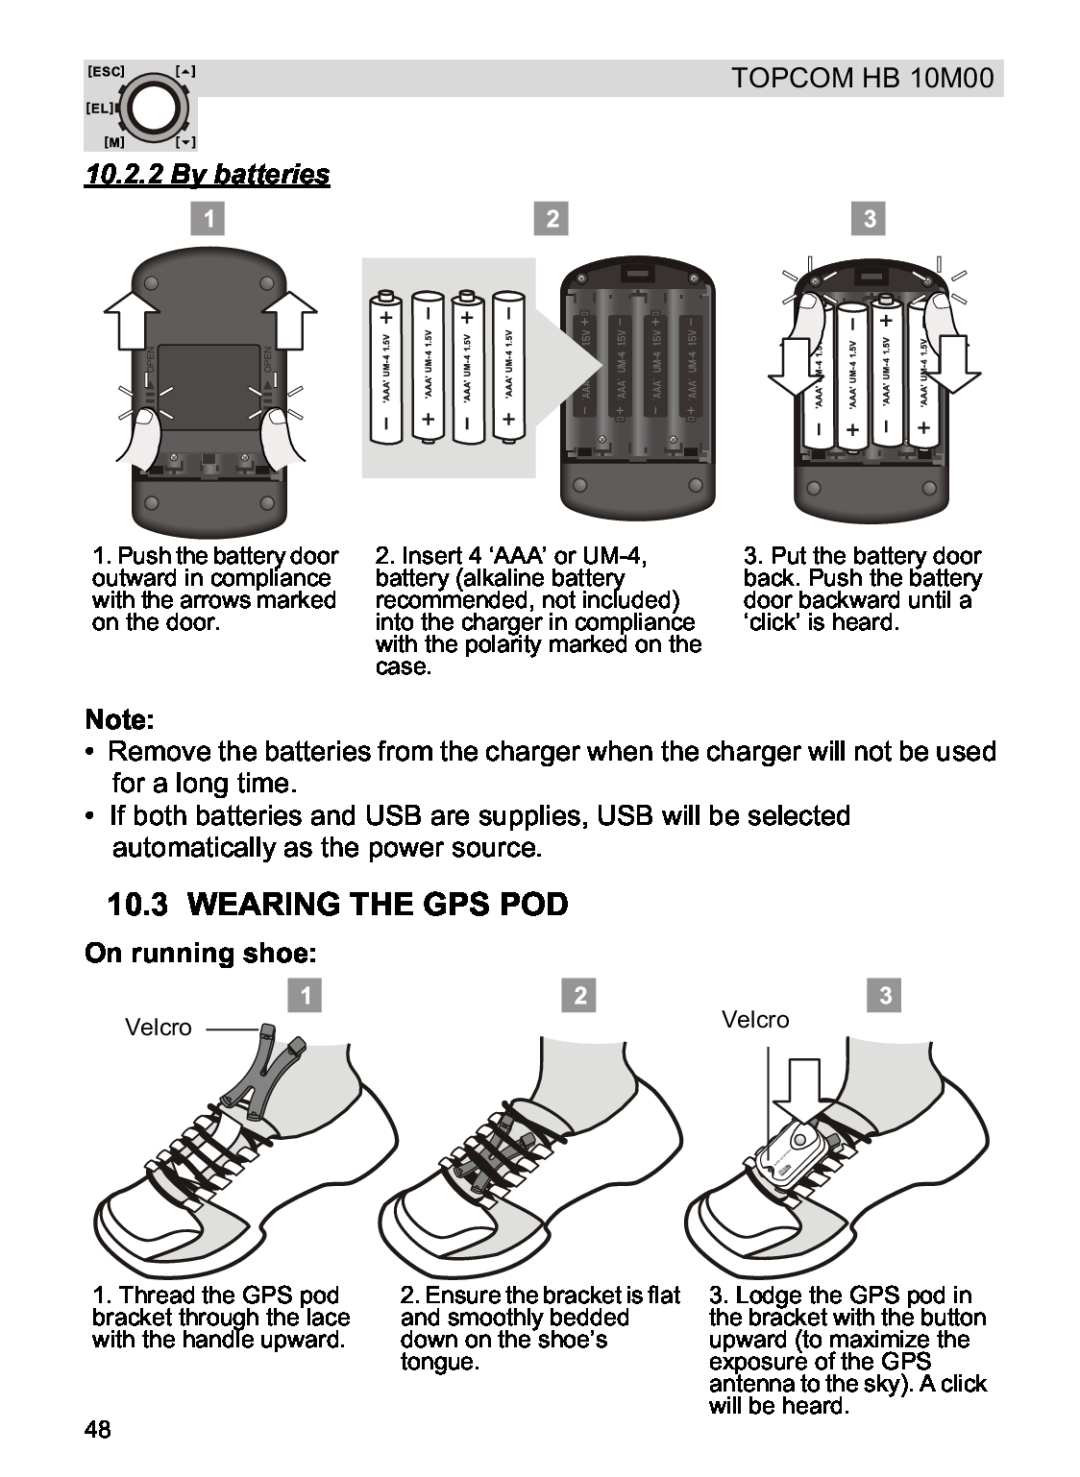 Topcom HB 10M00 manual Wearing The Gps Pod, By batteries, On running shoe 